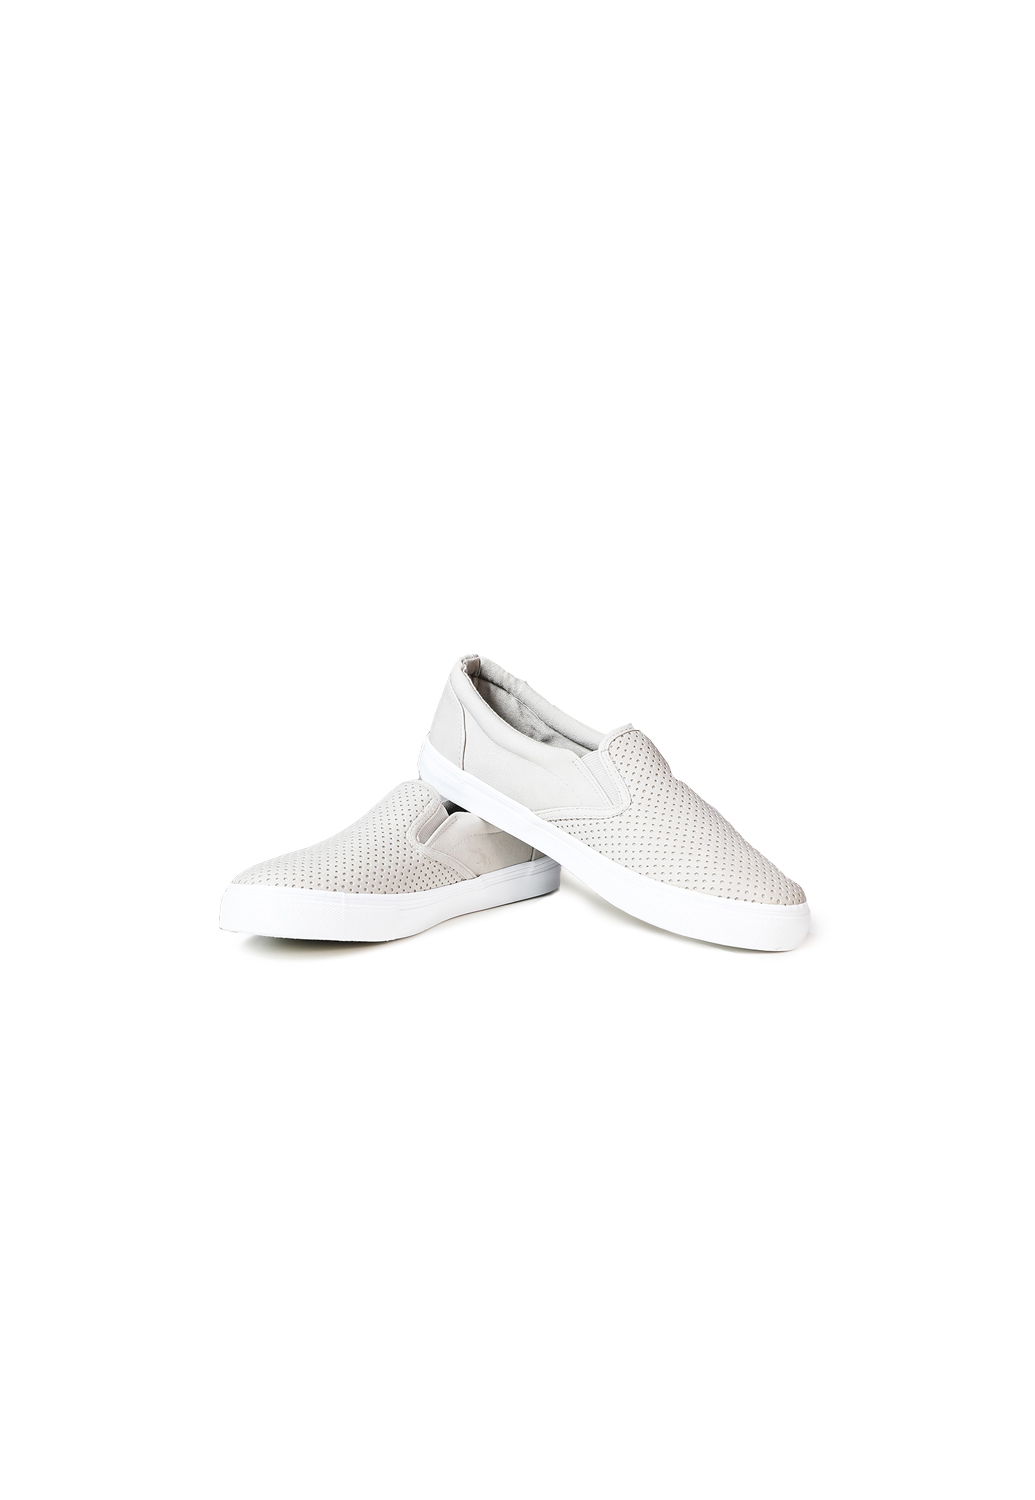 Perforated Faux Leather Slip-On